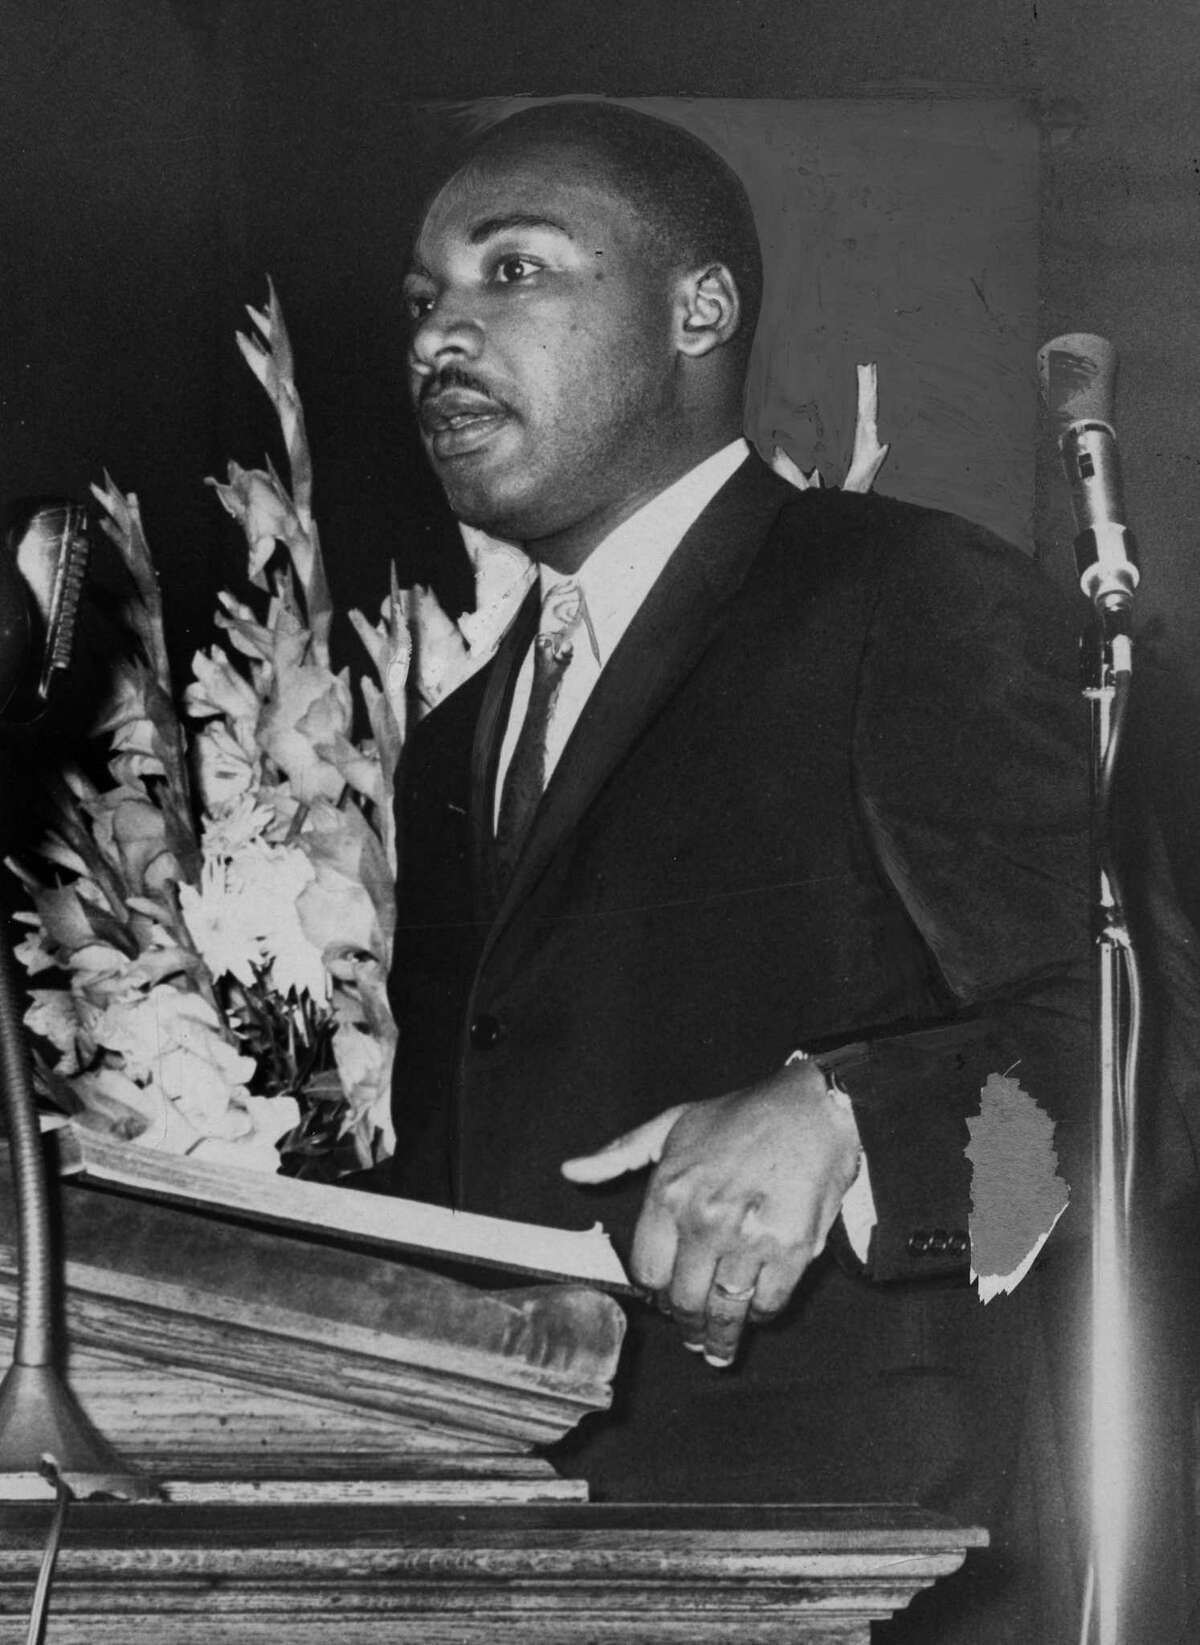 Martin Luther King Jr. speaks from the podium on June 16, 1961, in Albany. (Times Union archive)